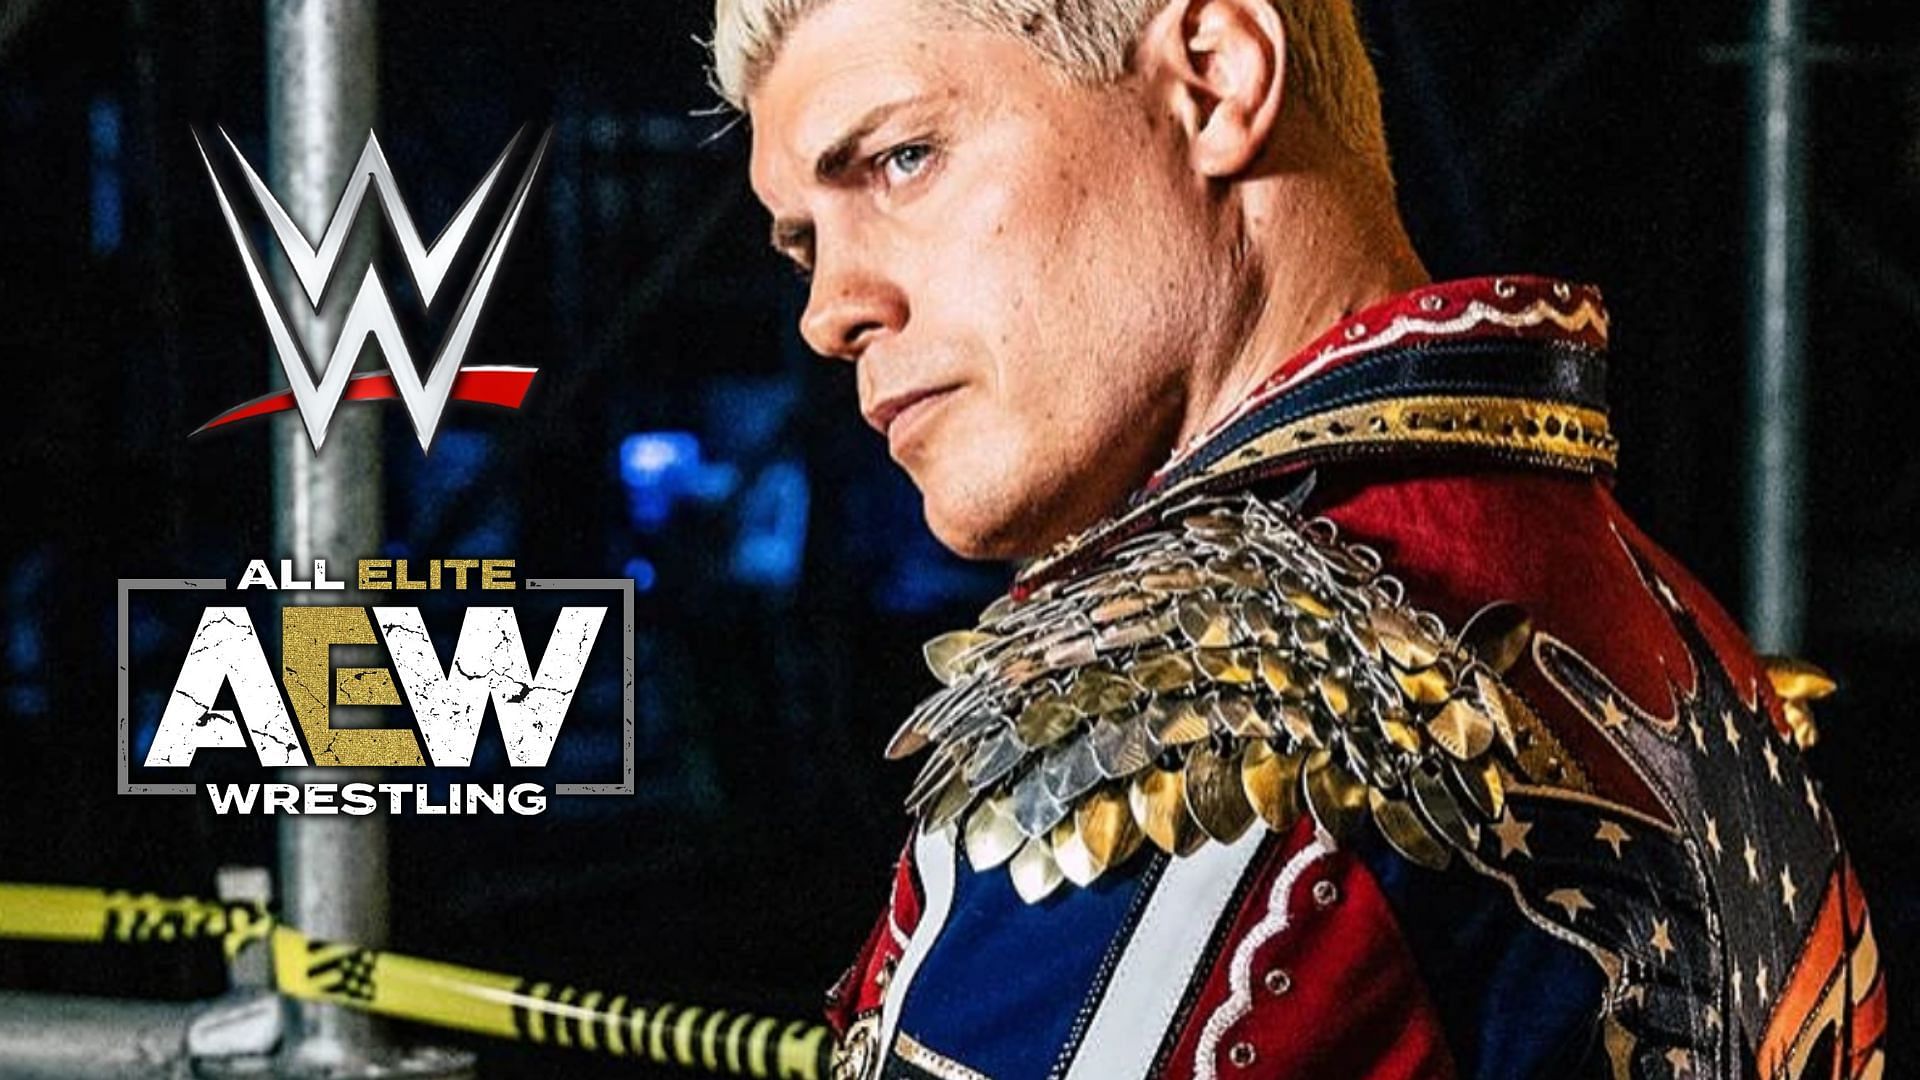 Cody Rhodes apparently had a shortened match in AEW